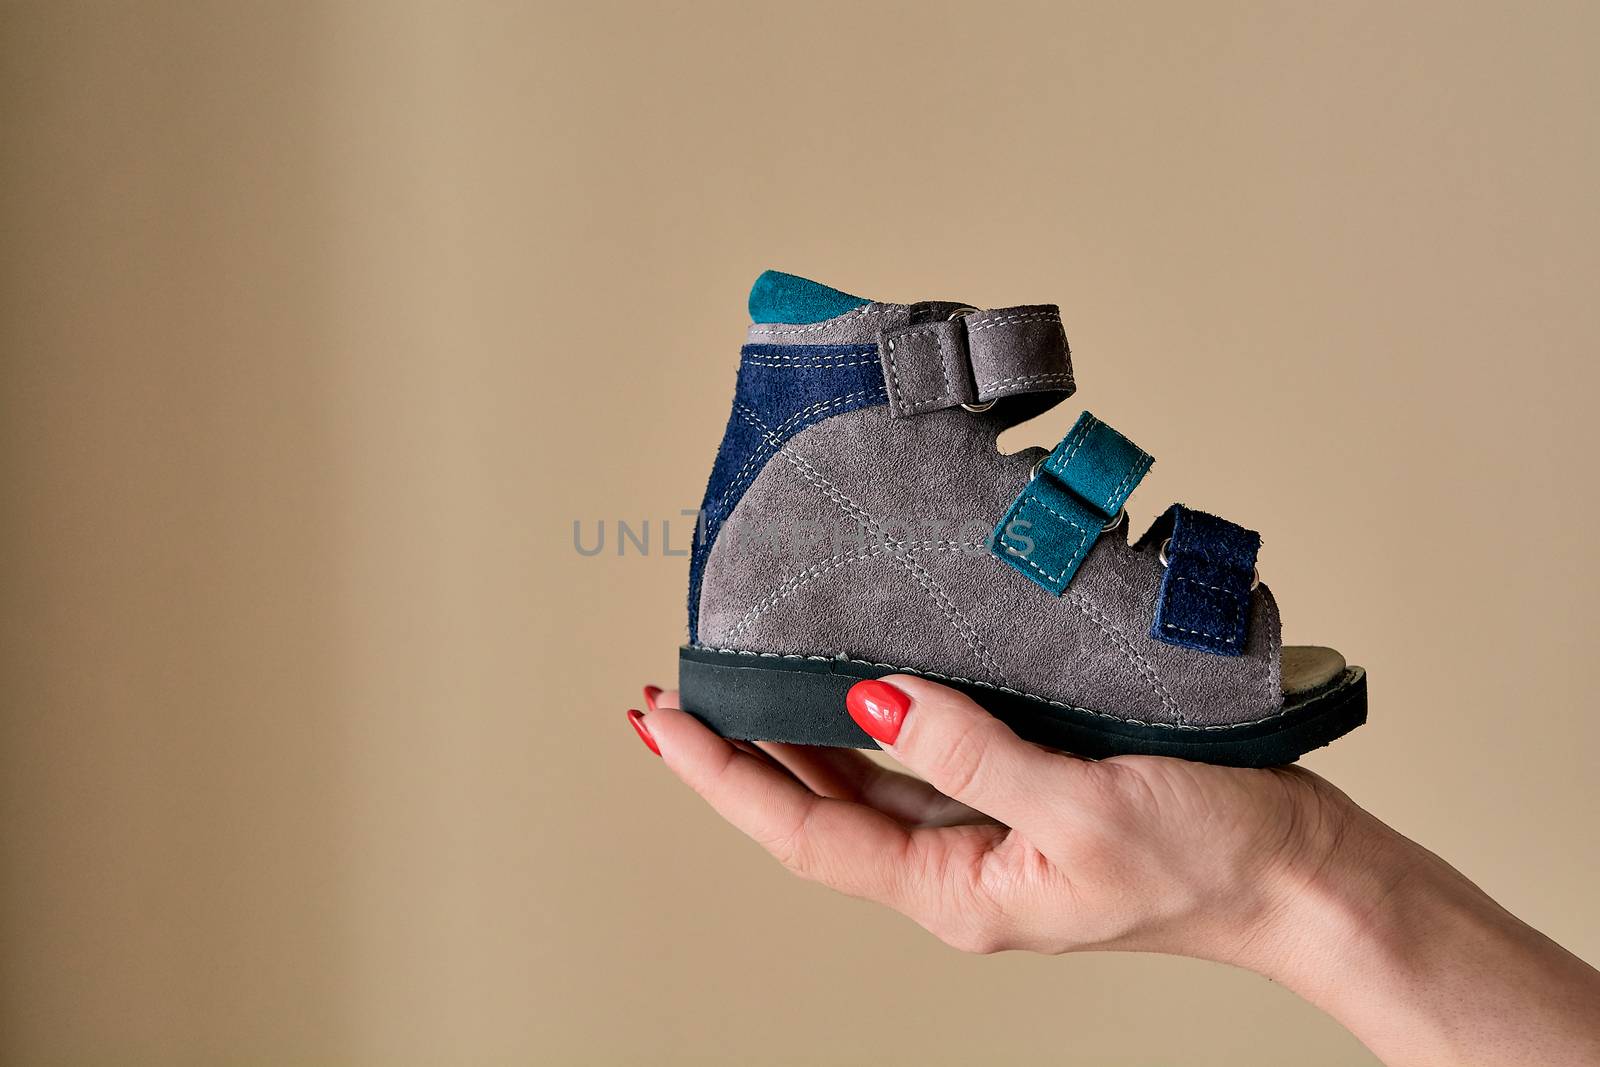 Female is holding close-up a special children's orthopedic shoe sandals made of genuine leather. Comfortable shoes isolated on light background with copyspace. Image suitable for advertising.